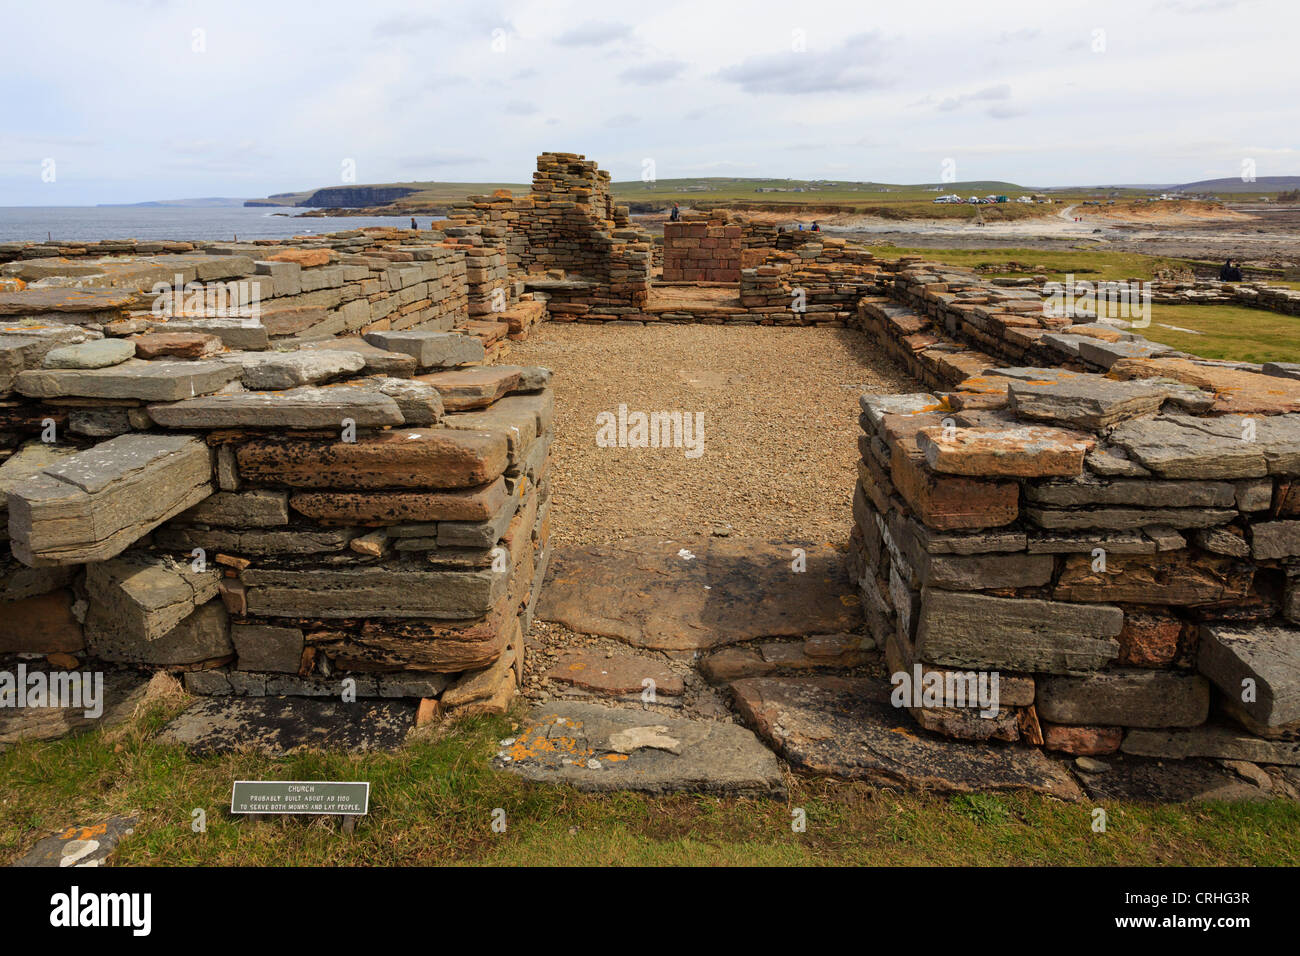 Ruined remains of 12th century Peter Kirk church in Norse settlement excavated on Brough of Birsay Orkney Islands, Scotland, UK Stock Photo